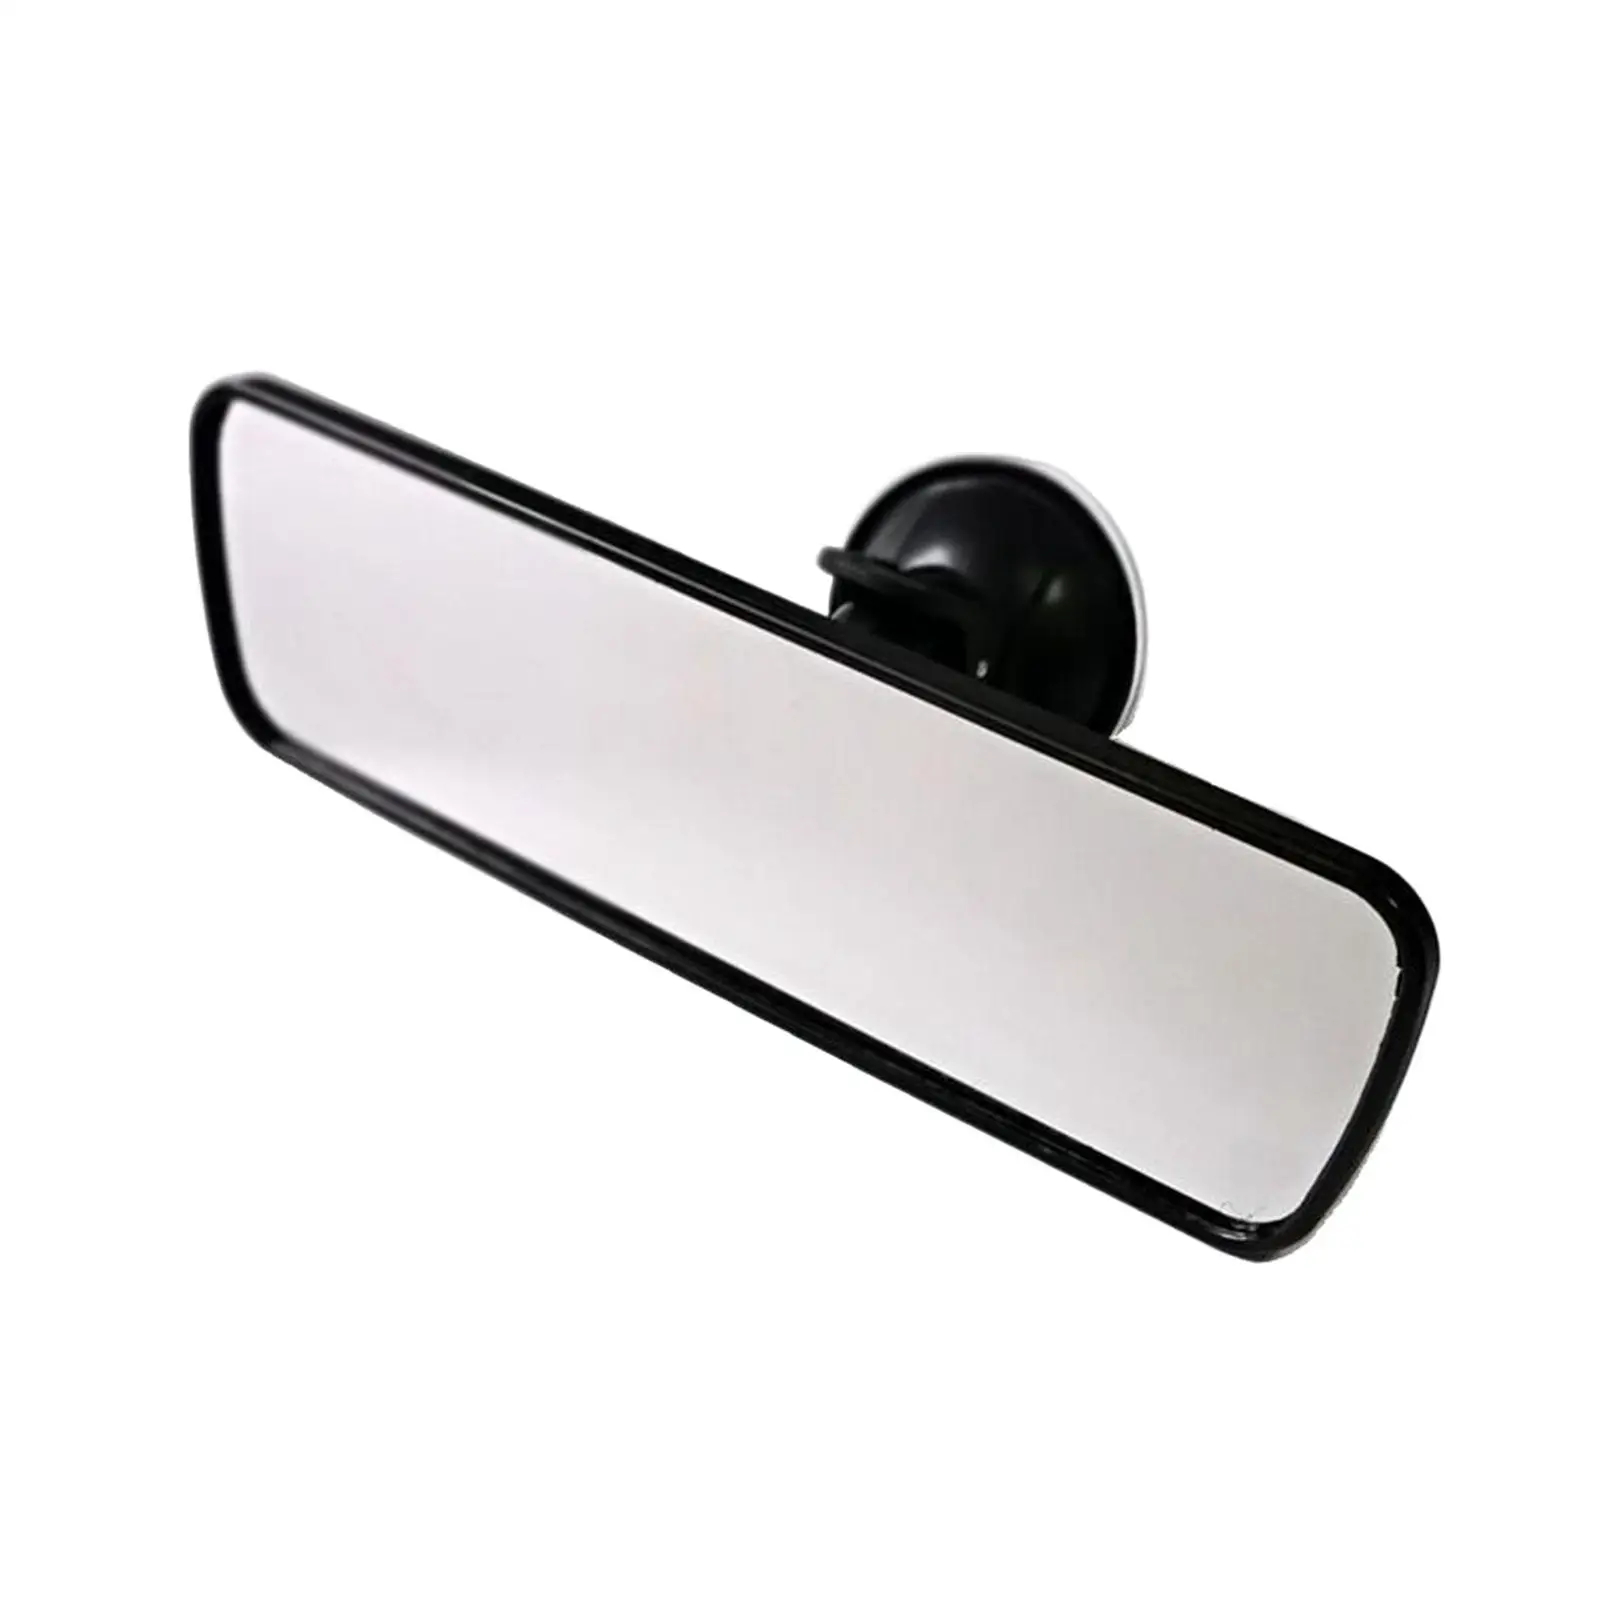 Car Interior Rear View Mirror, Durable Anti Glare with Suction Cup Auxiliary